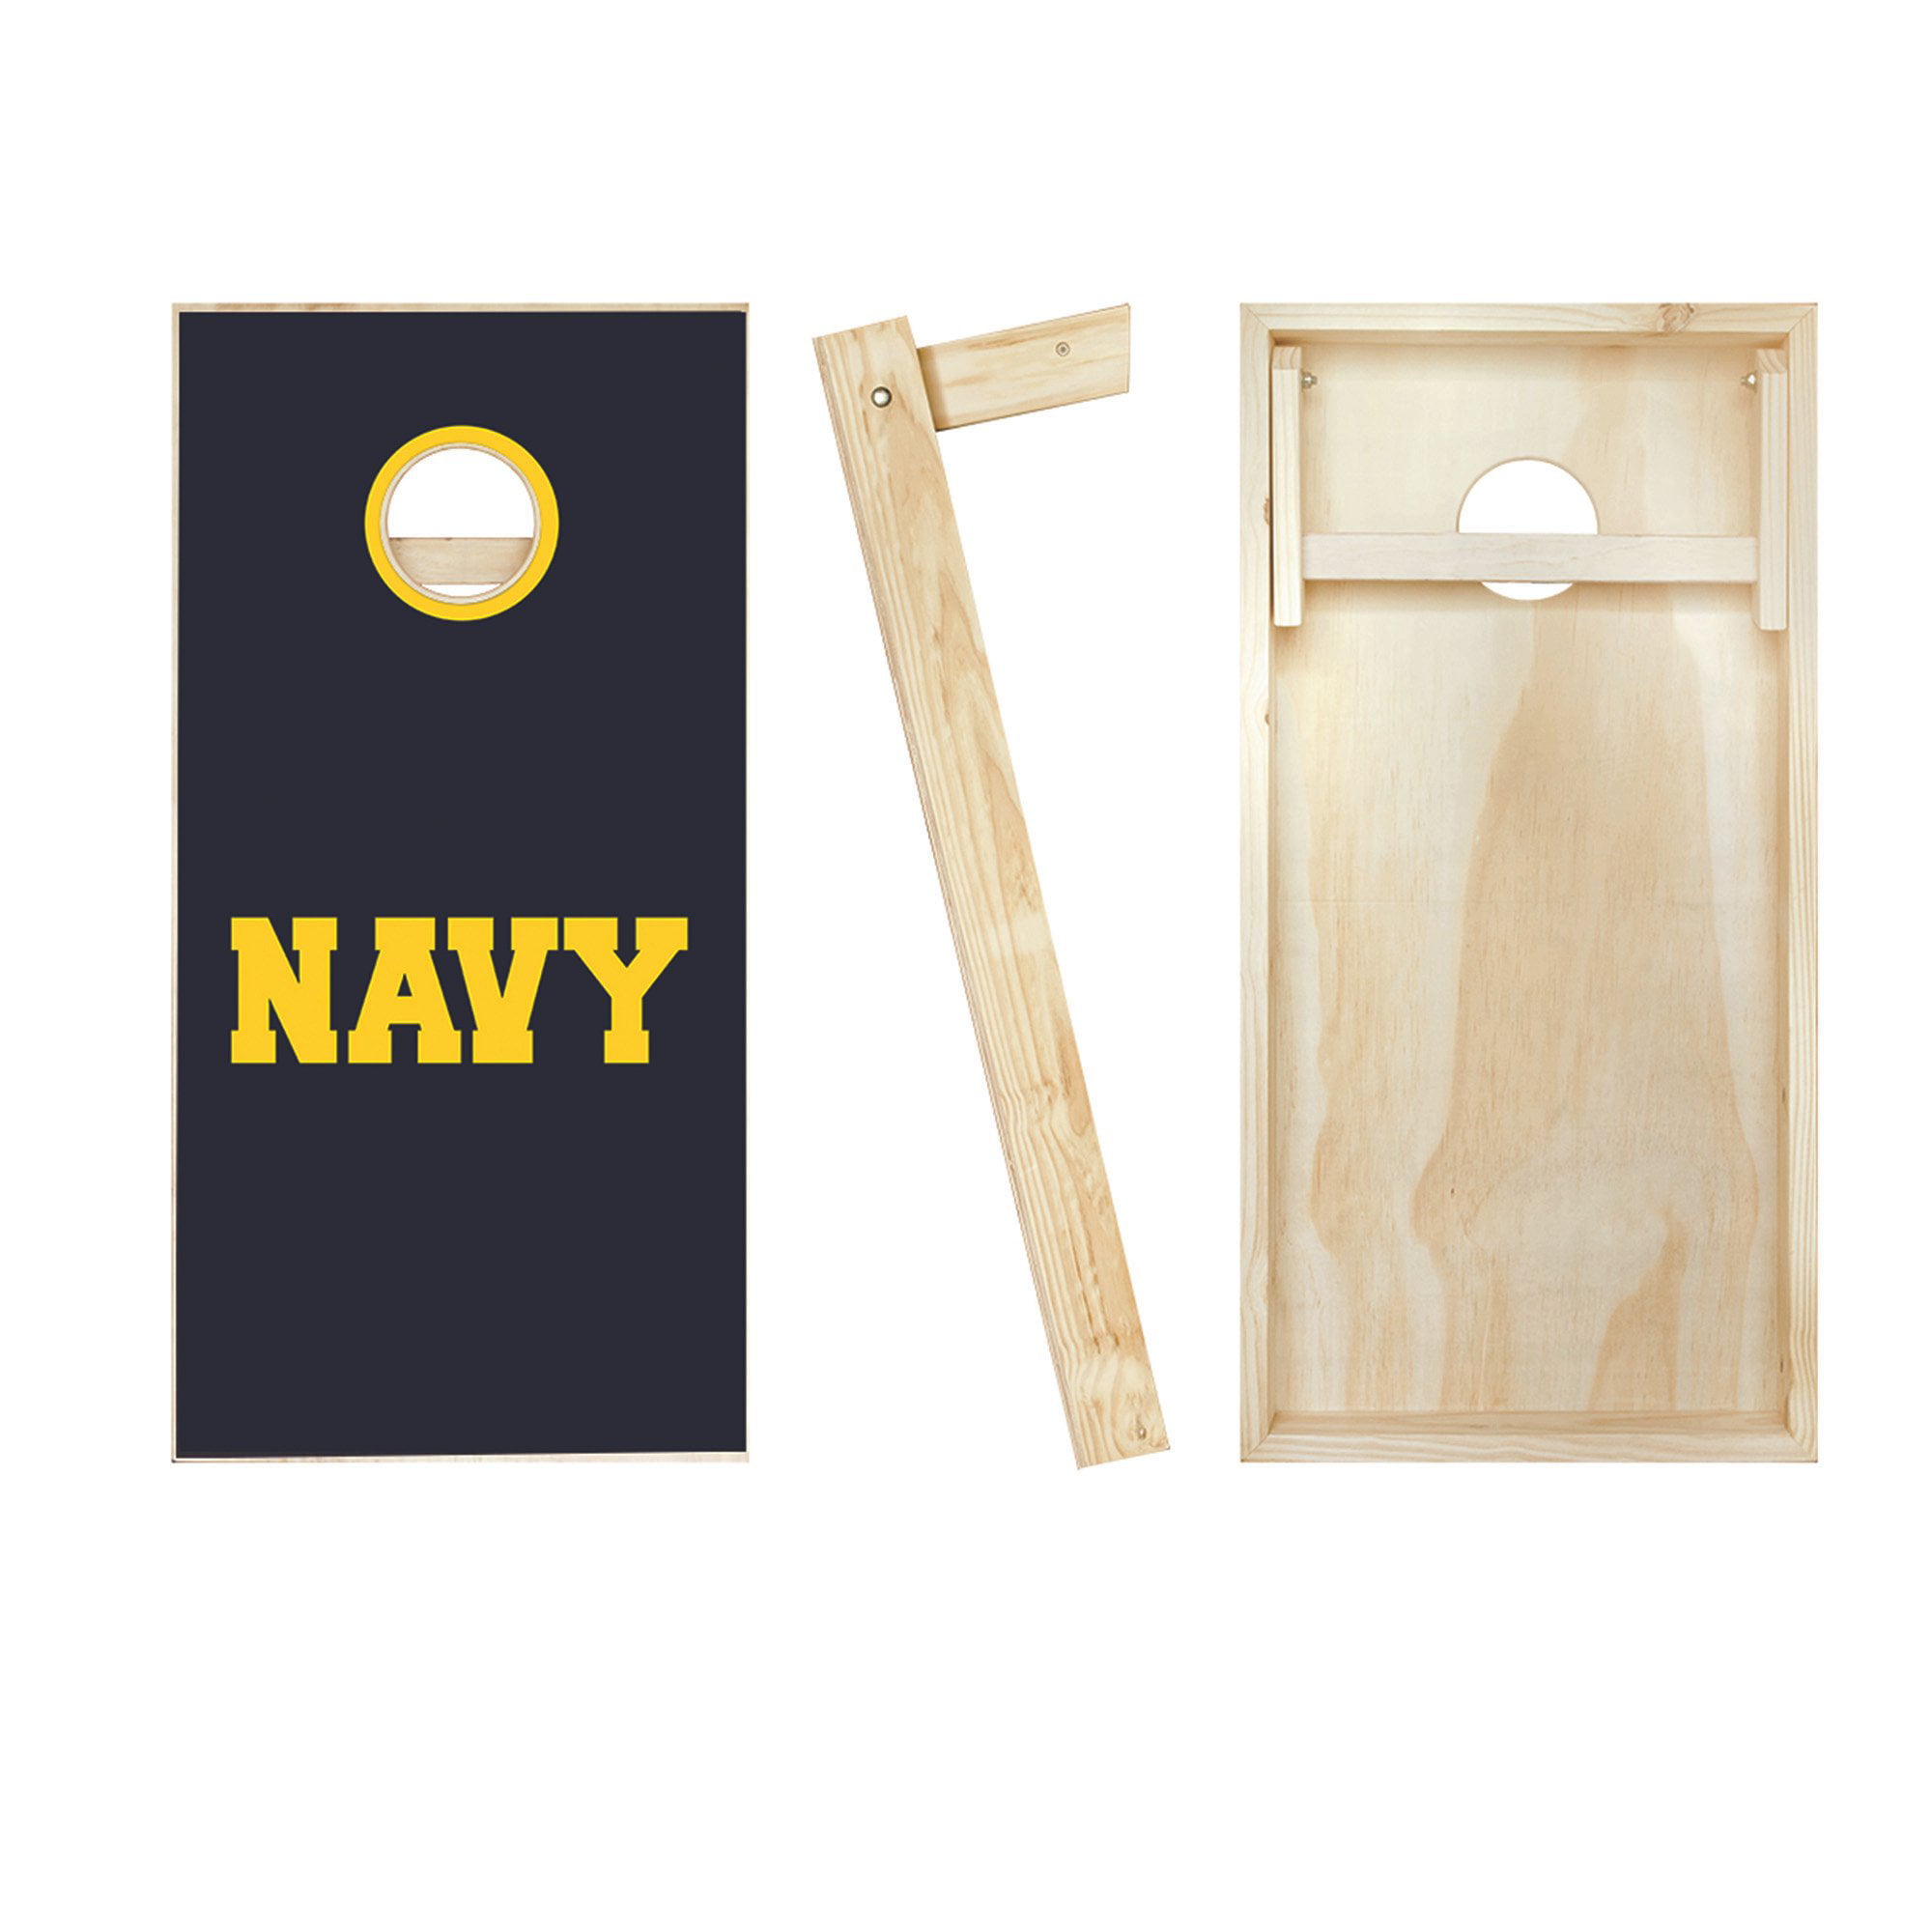 United States Navy Two Tone Wood Cornhole Board Wraps FREE SQUEEGEE #3153 